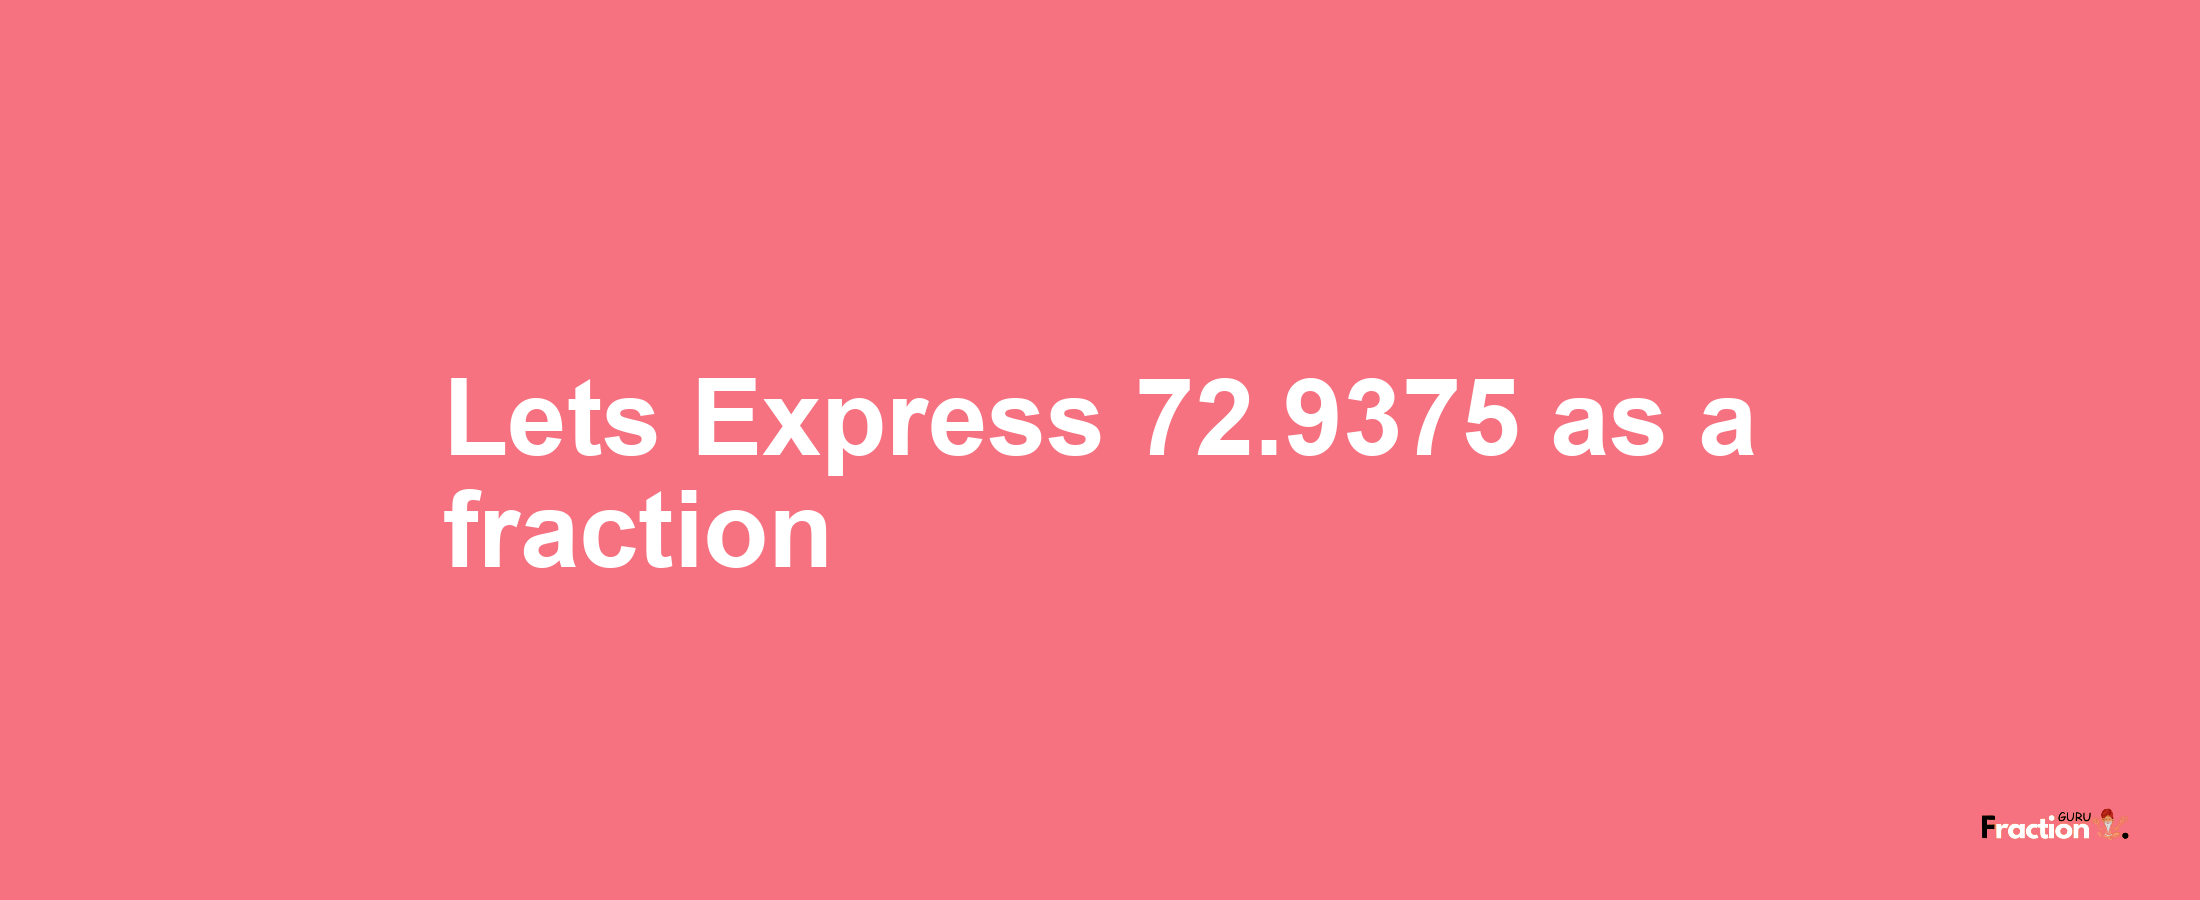 Lets Express 72.9375 as afraction